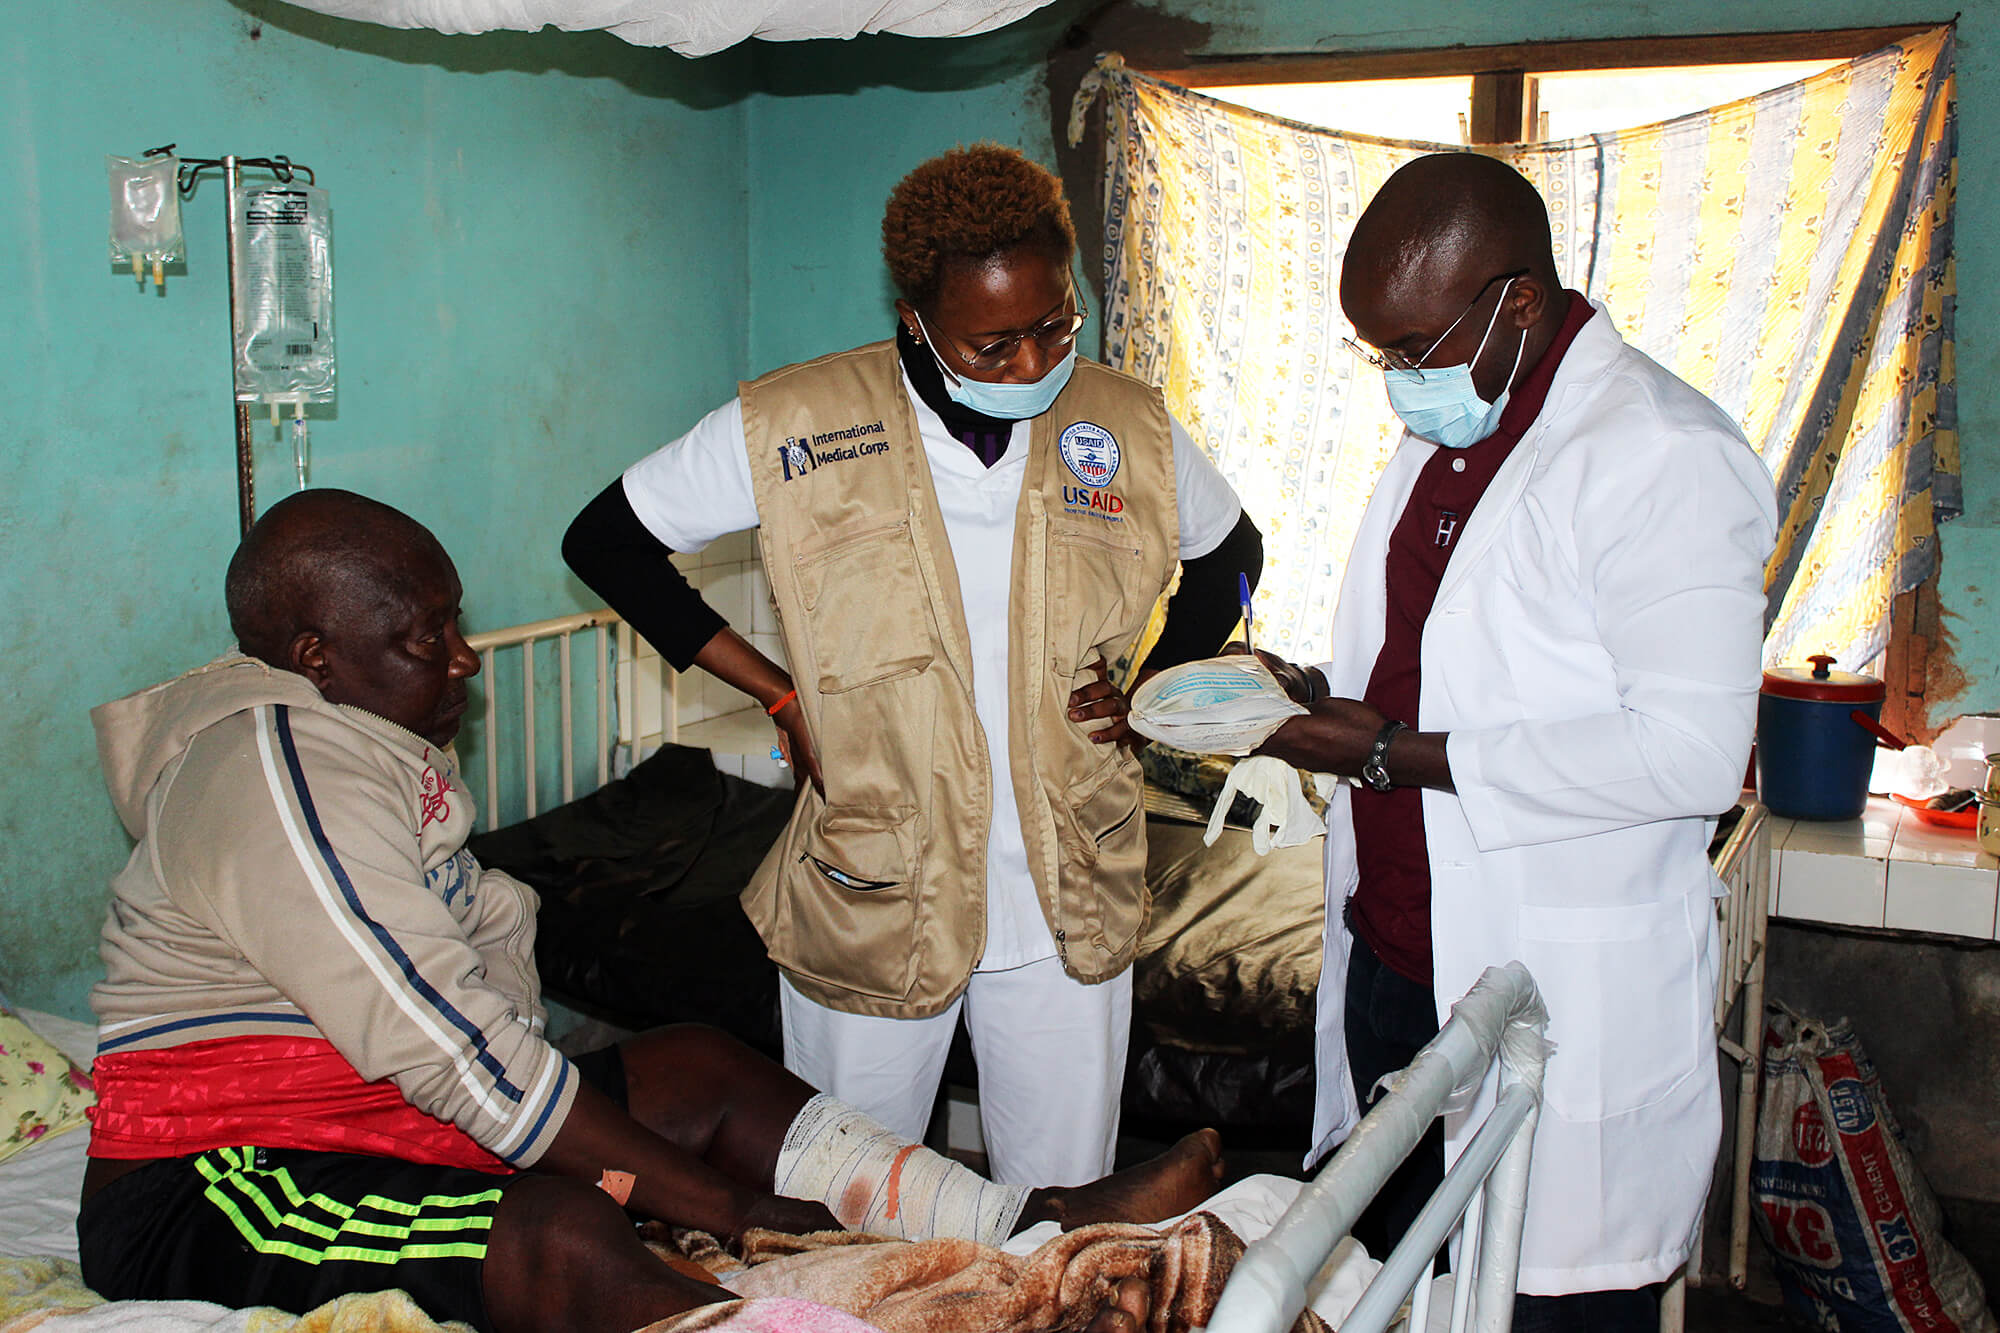 Dr. Norbert Lemonge, a general practitioner and Health Activities Project Manager, and Nurse Judit Manyong check on a patient with a gunshot wound during ward rounds in Konda IHC. In this region, a war is causing injury and death among civilians.